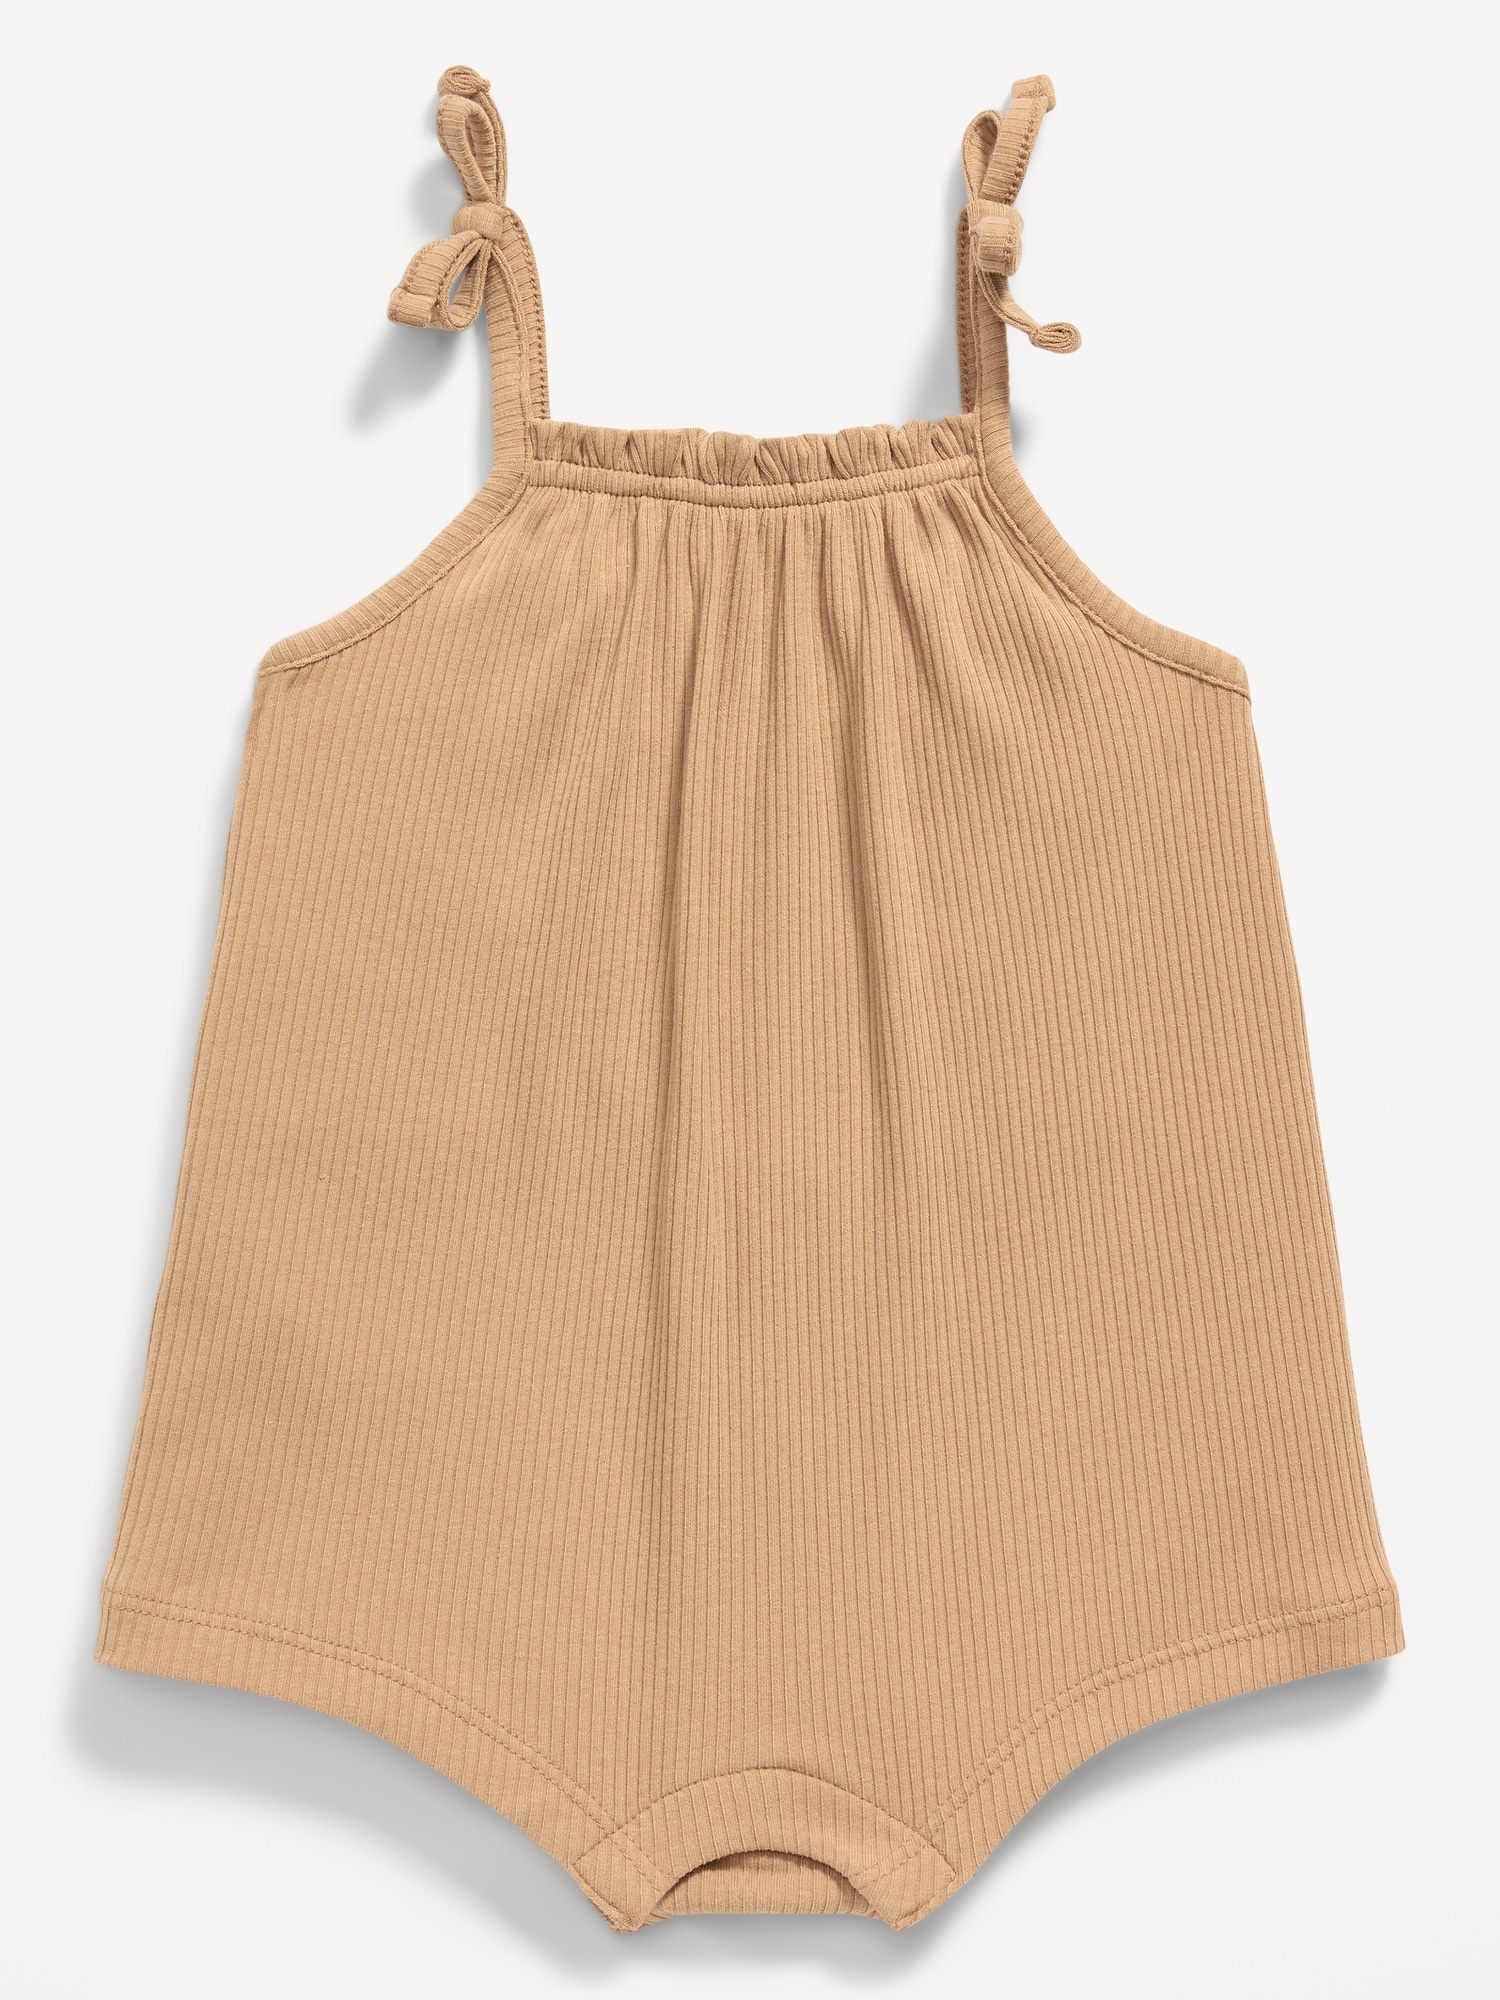 Tie-Bow One-Piece Romper for Baby Hot Deal